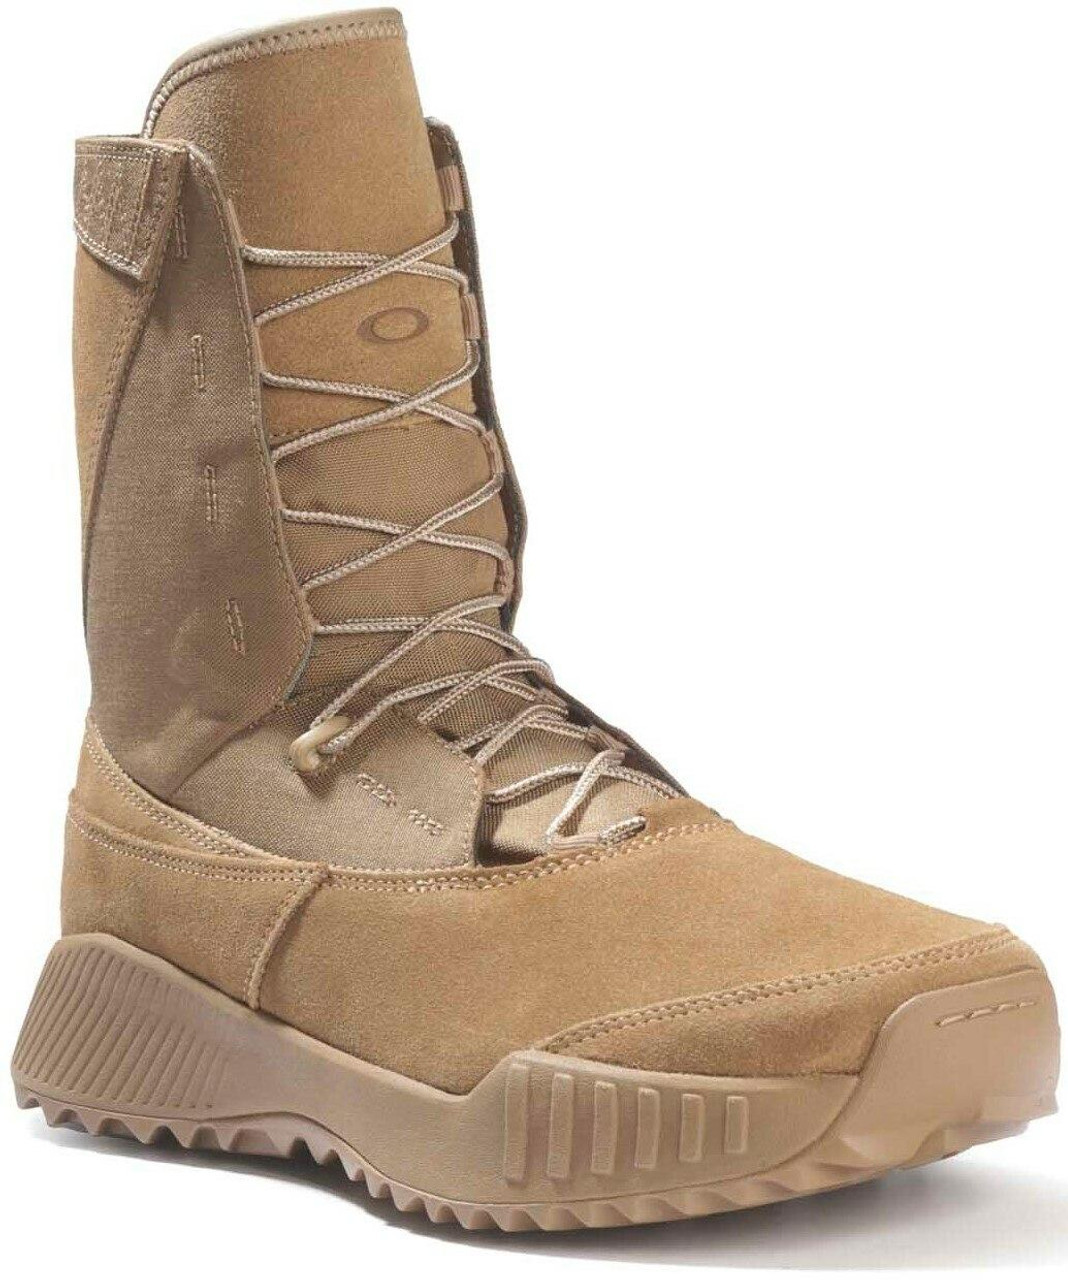 Oakley Elite Assault Coyote Boots buy with delivery to the USA 